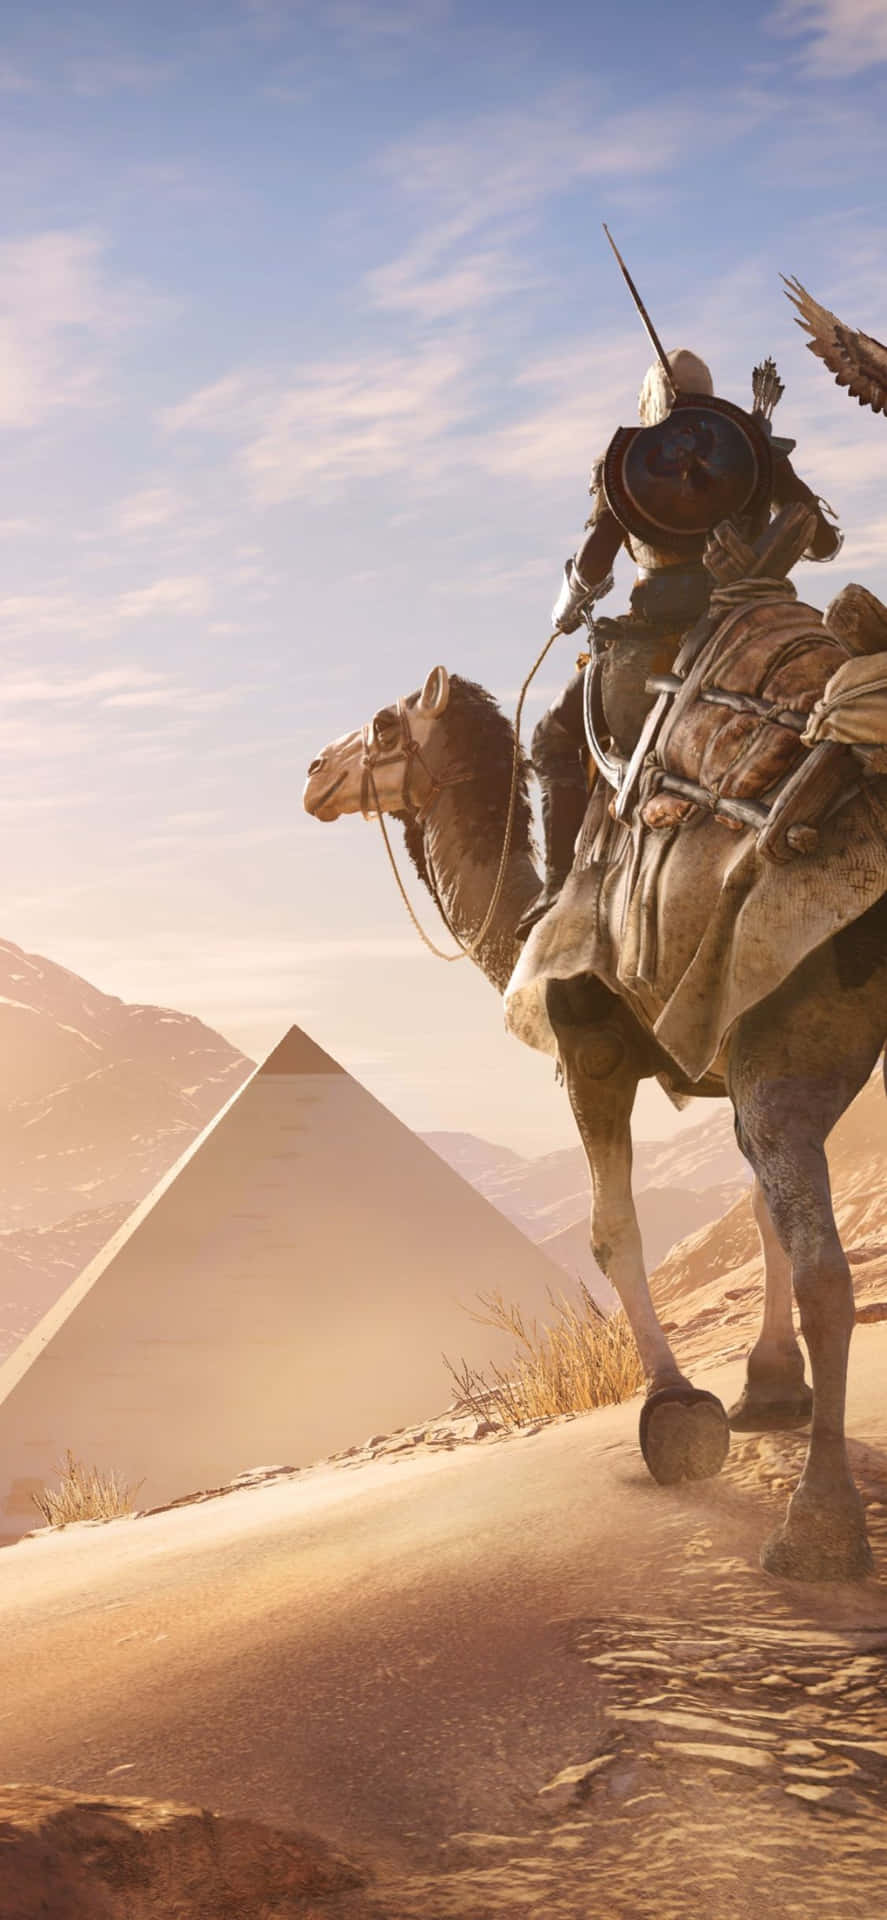 Dive Into the Action on Your Iphone X with Assassin's Creed Origins